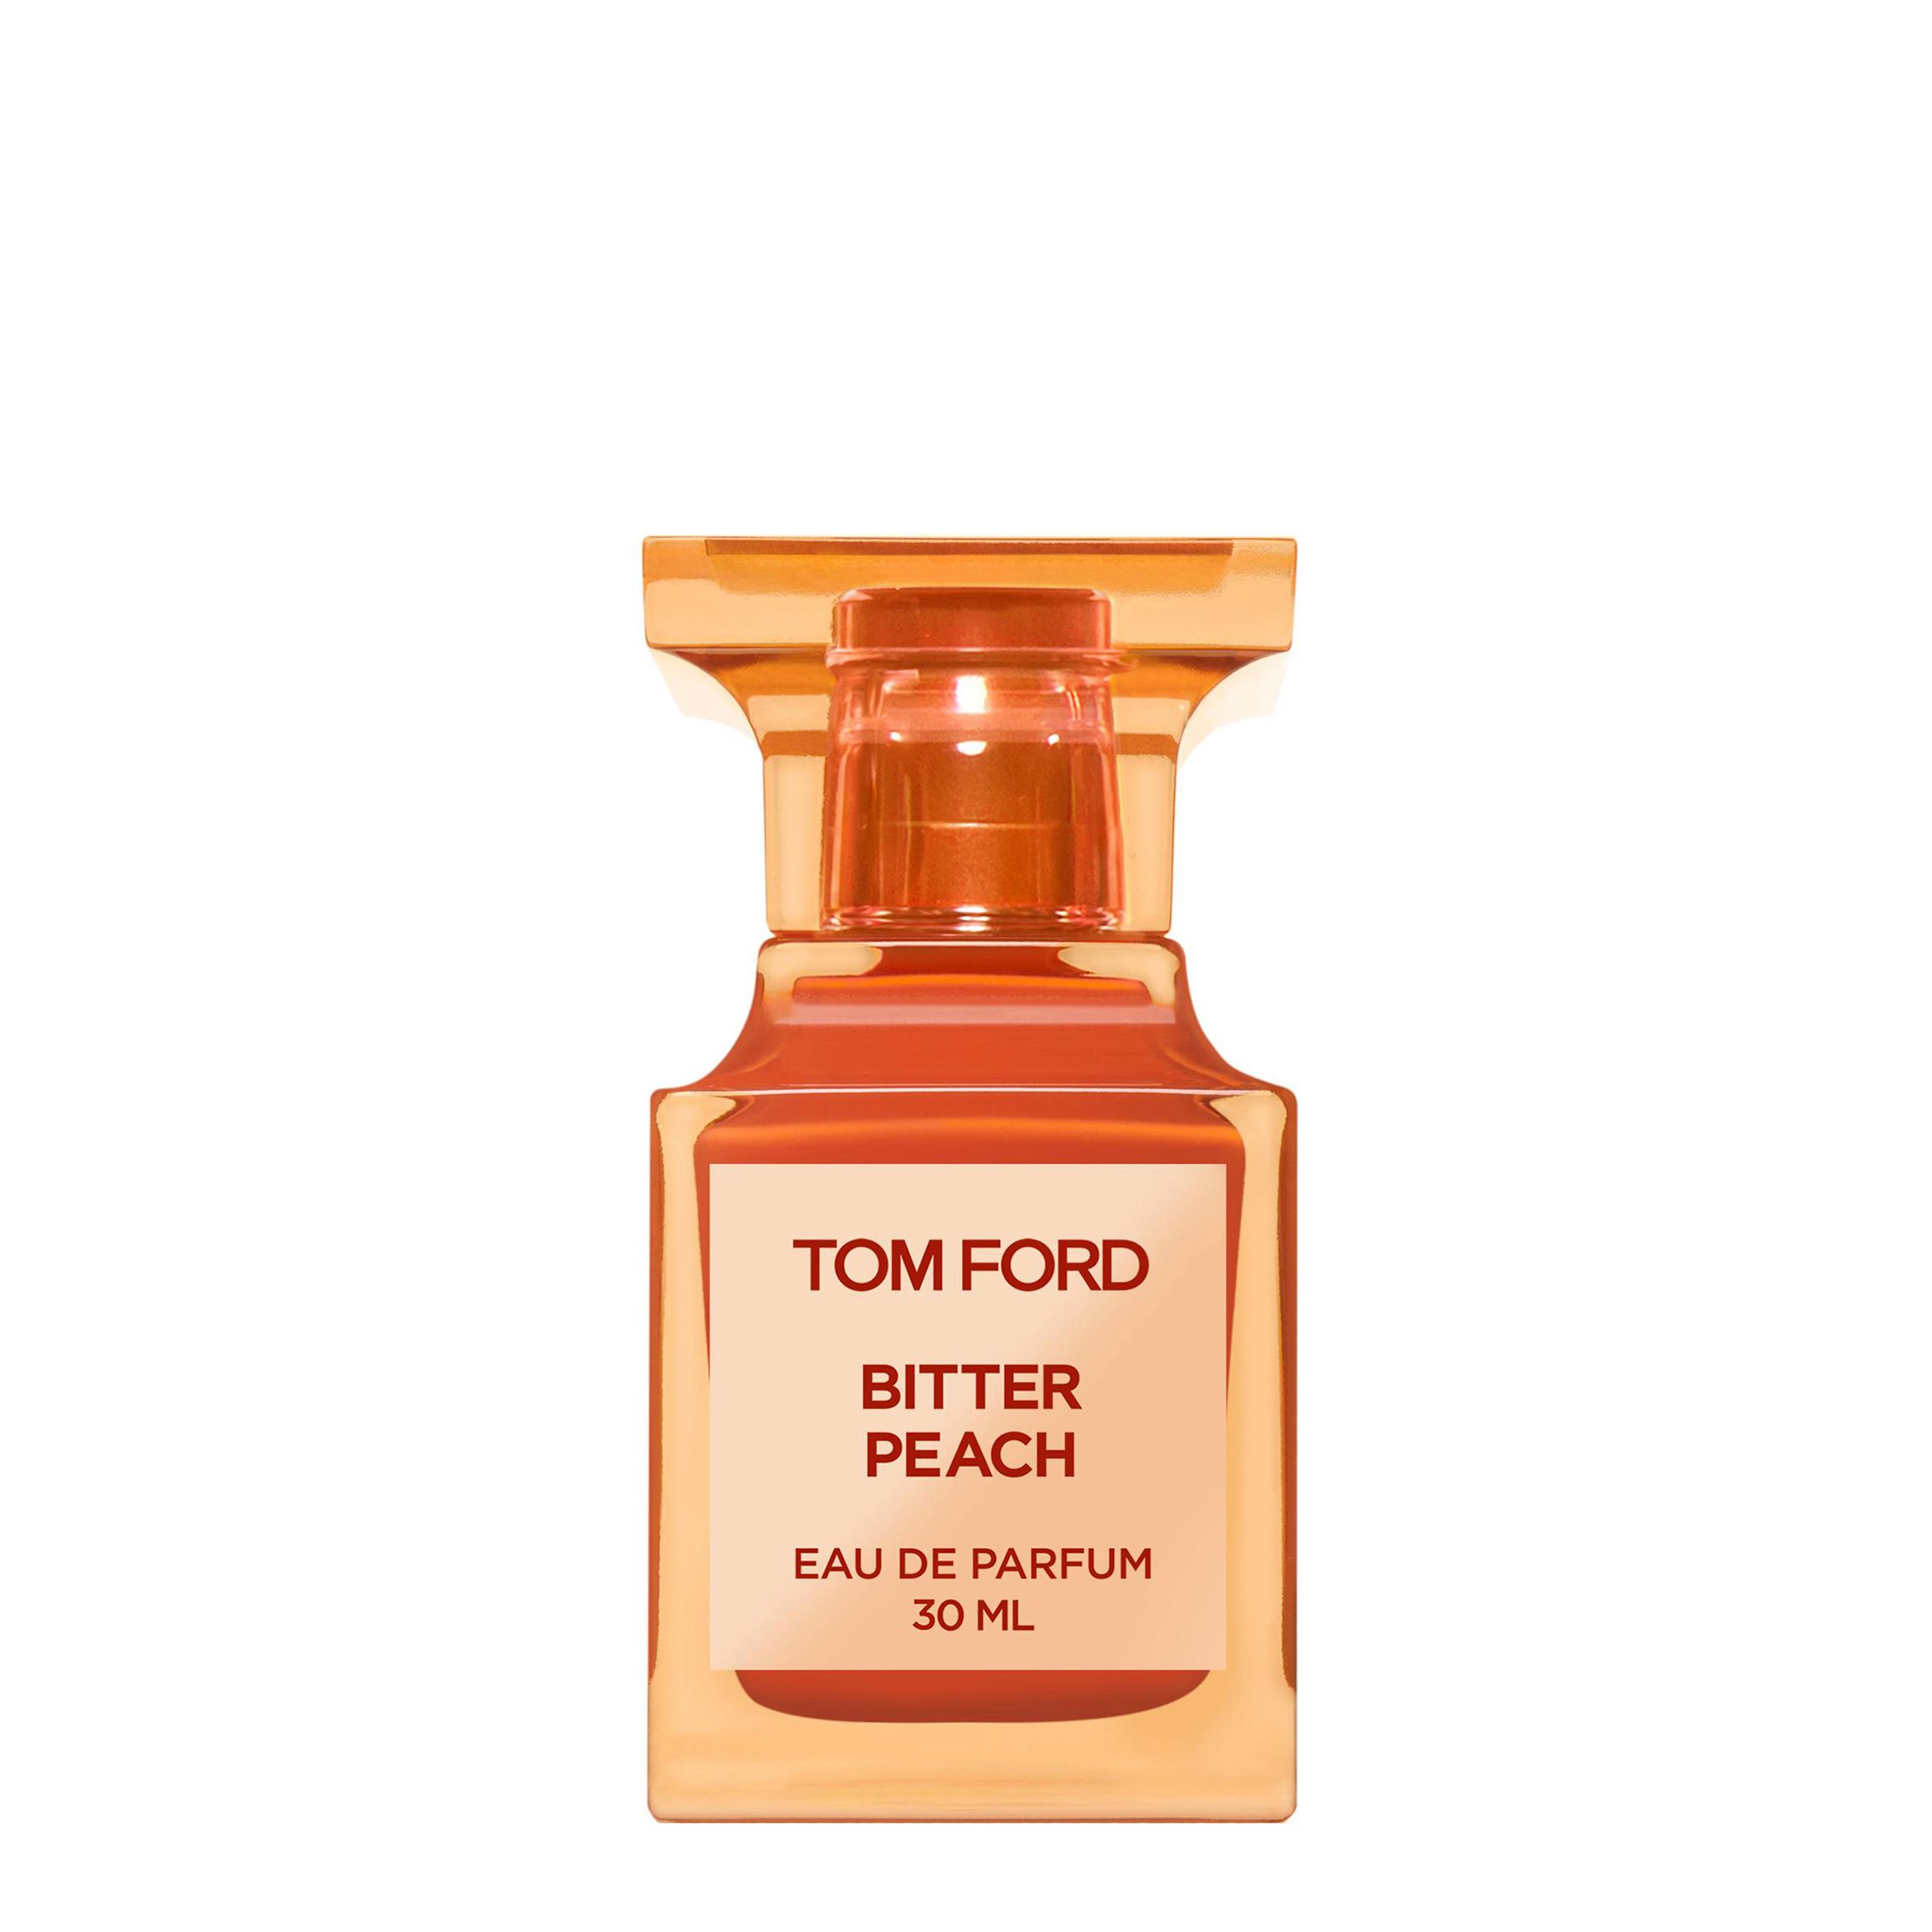 Вода парфюмерная Tom Ford Bitter Peach, унисекс, 30 мл bitter remains a custody battle a gruesome crime and the mother who paid the ultimate price